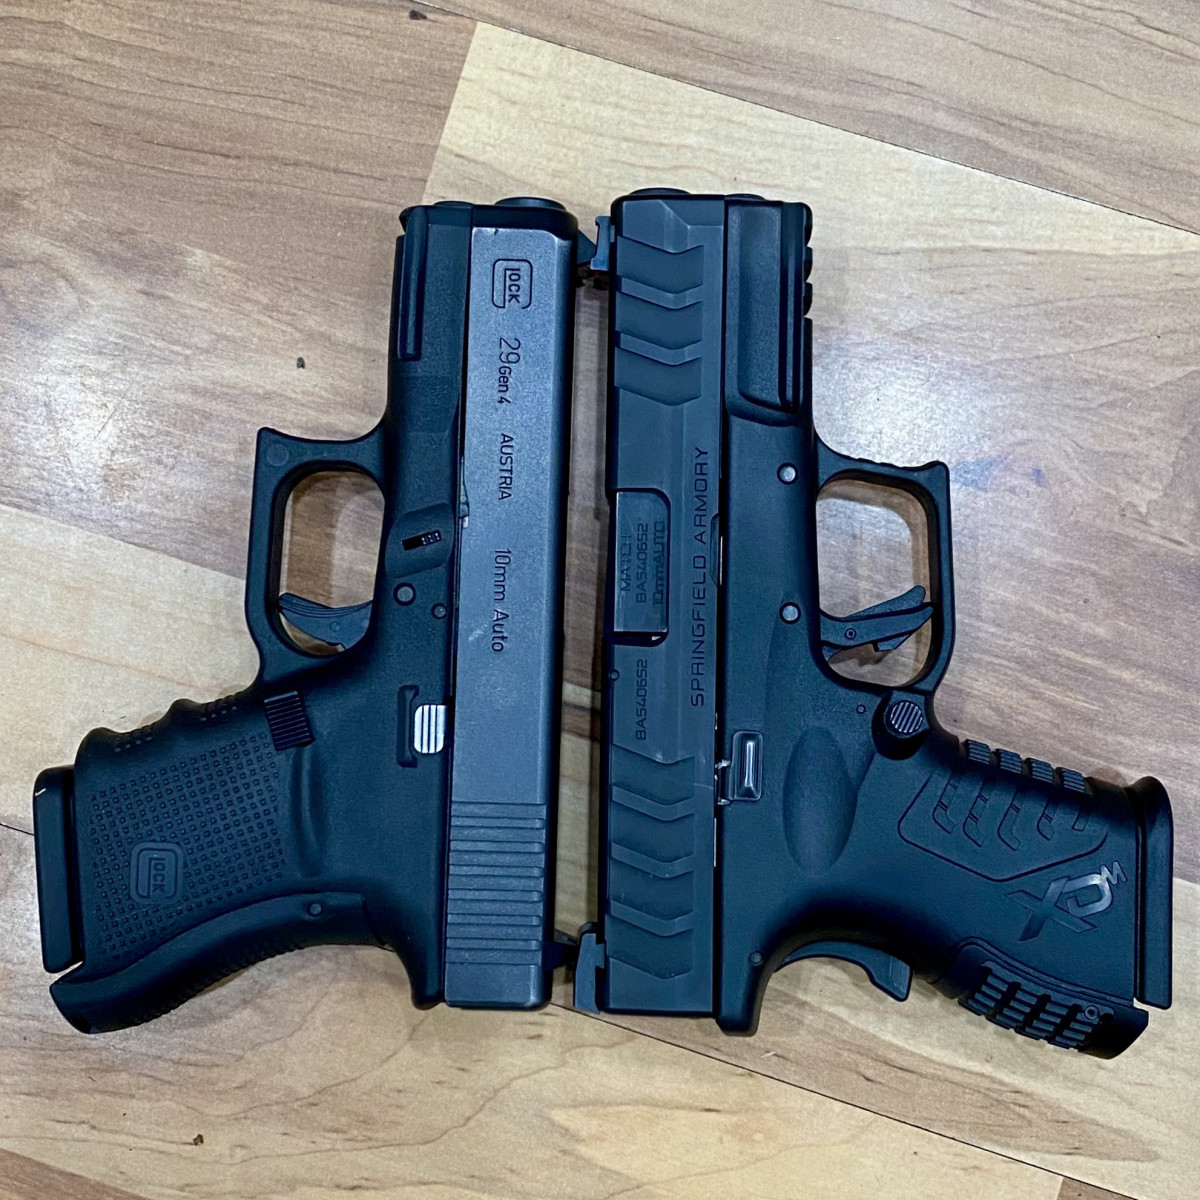 Glock 29 on the left, XDM Elite compact on the right